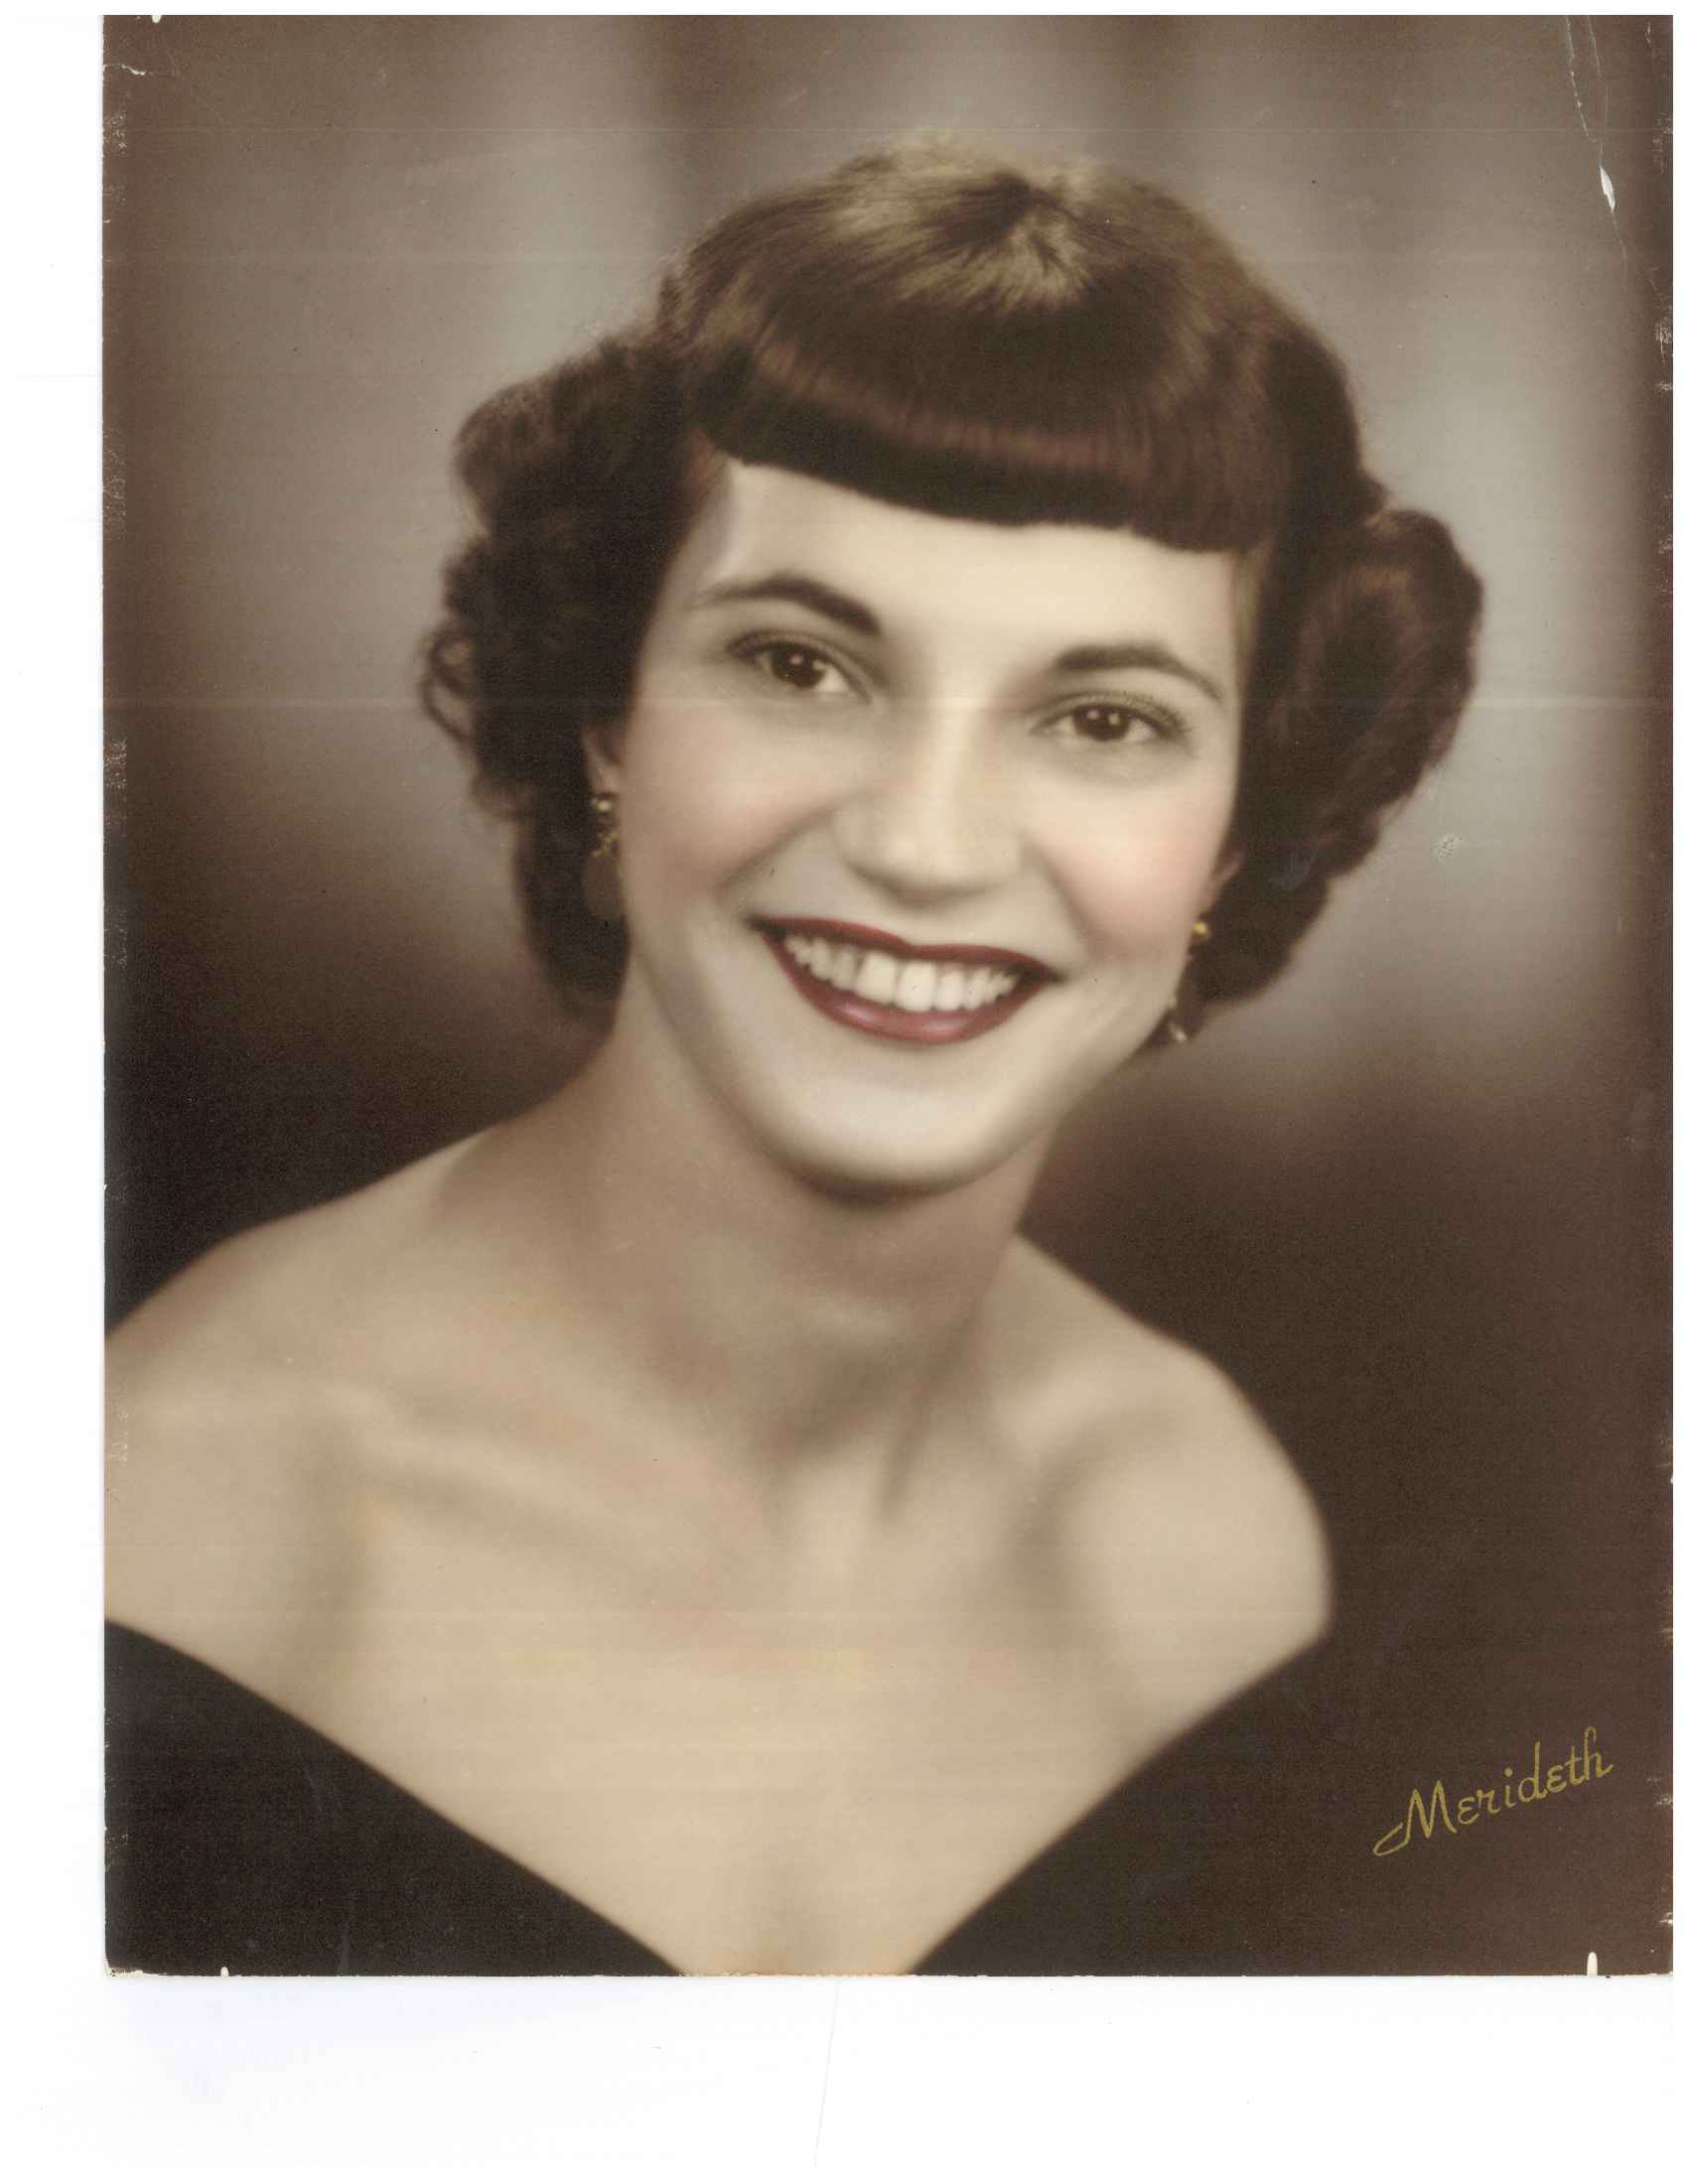 Mrs. Marie C. (Genovese) Caputo, 85, of Middlebury passed away peacefully in the presence of her loving family Thursday July 9, 2015, at the VITAS Inpatient ... - CAPUTO-MARIE-NEWSPAPER